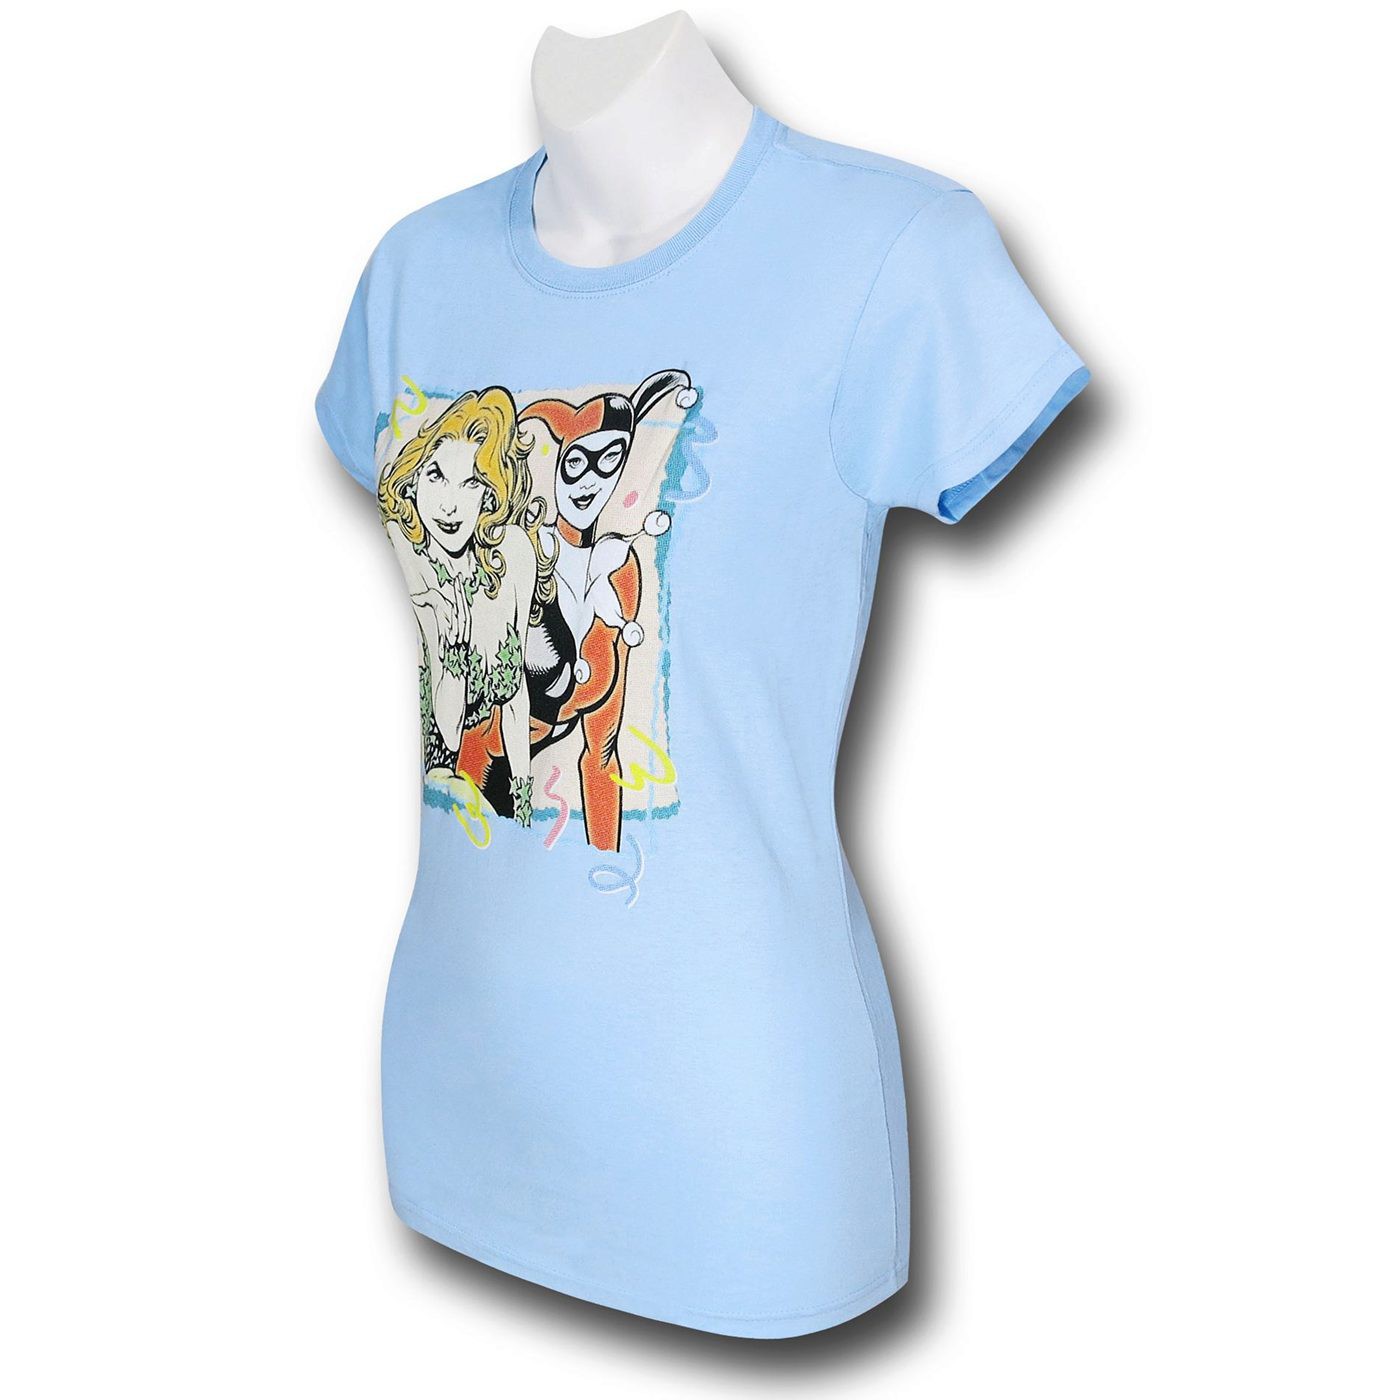 Harley and Ivy Women's Light Blue T-Shirt